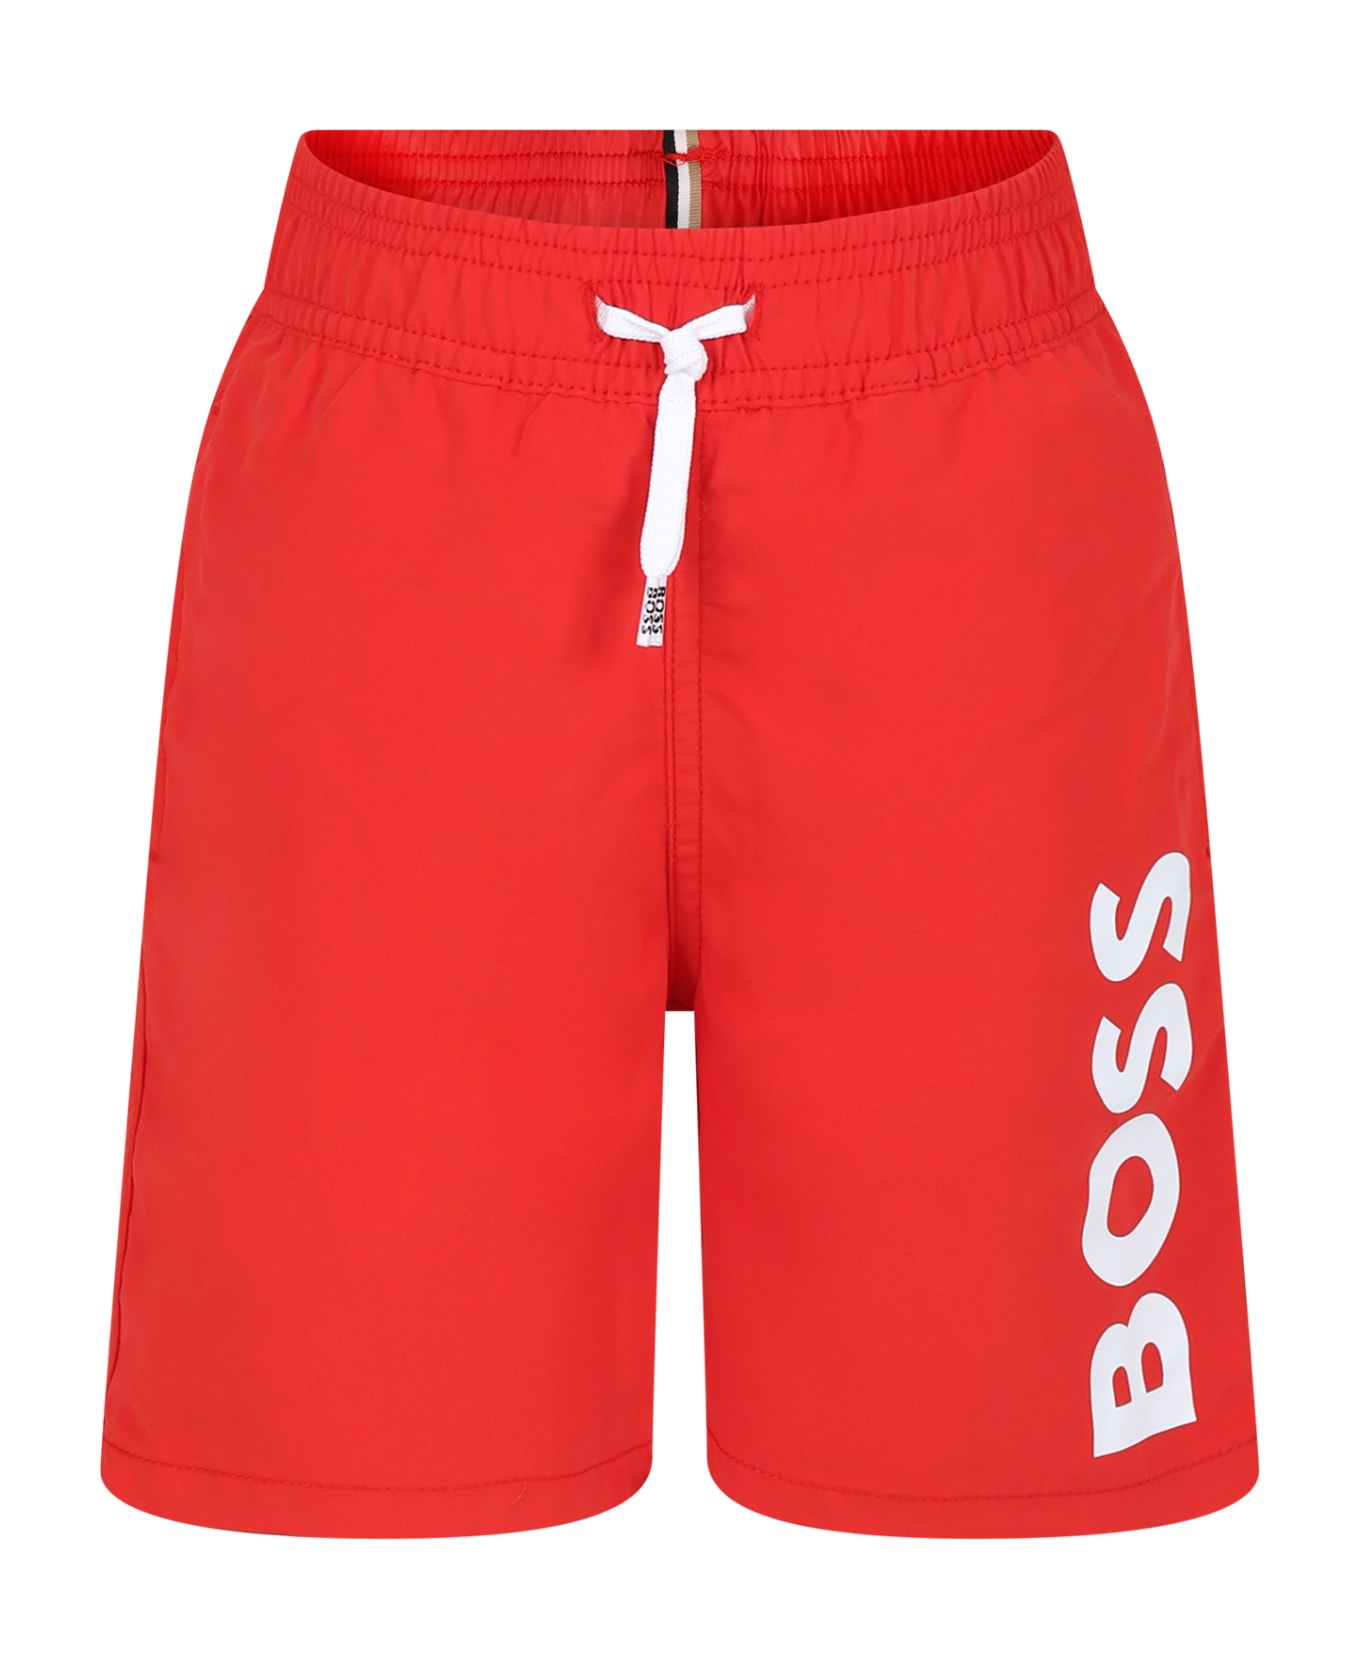 Hugo Boss Red Swim Shorts For Boy With Logo - Red